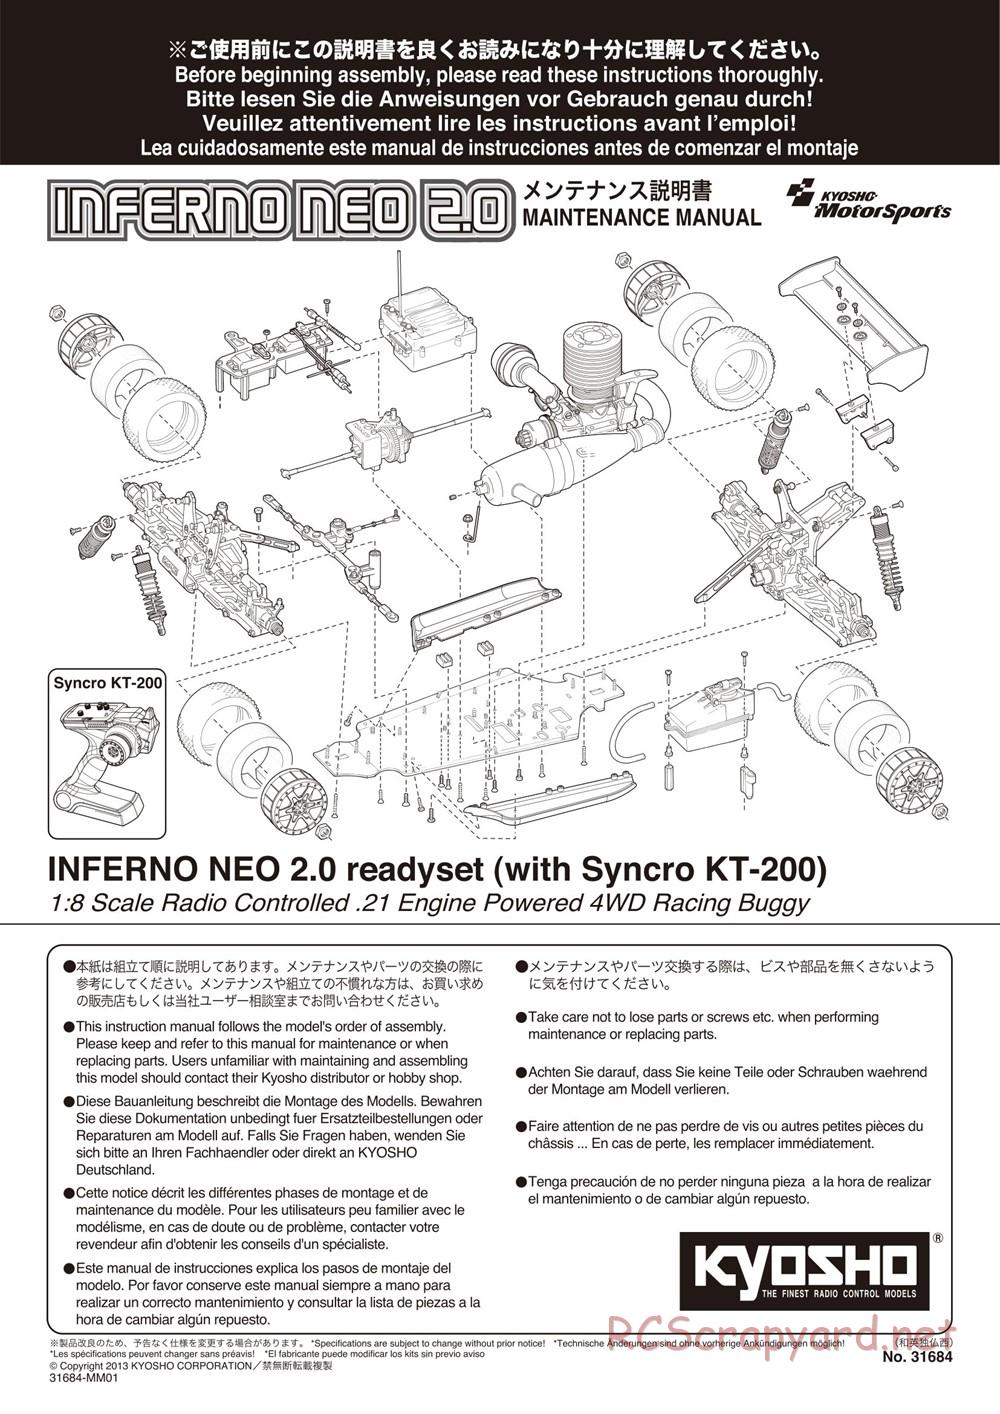 Kyosho - Inferno Neo 2.0 - Manual - Page 1